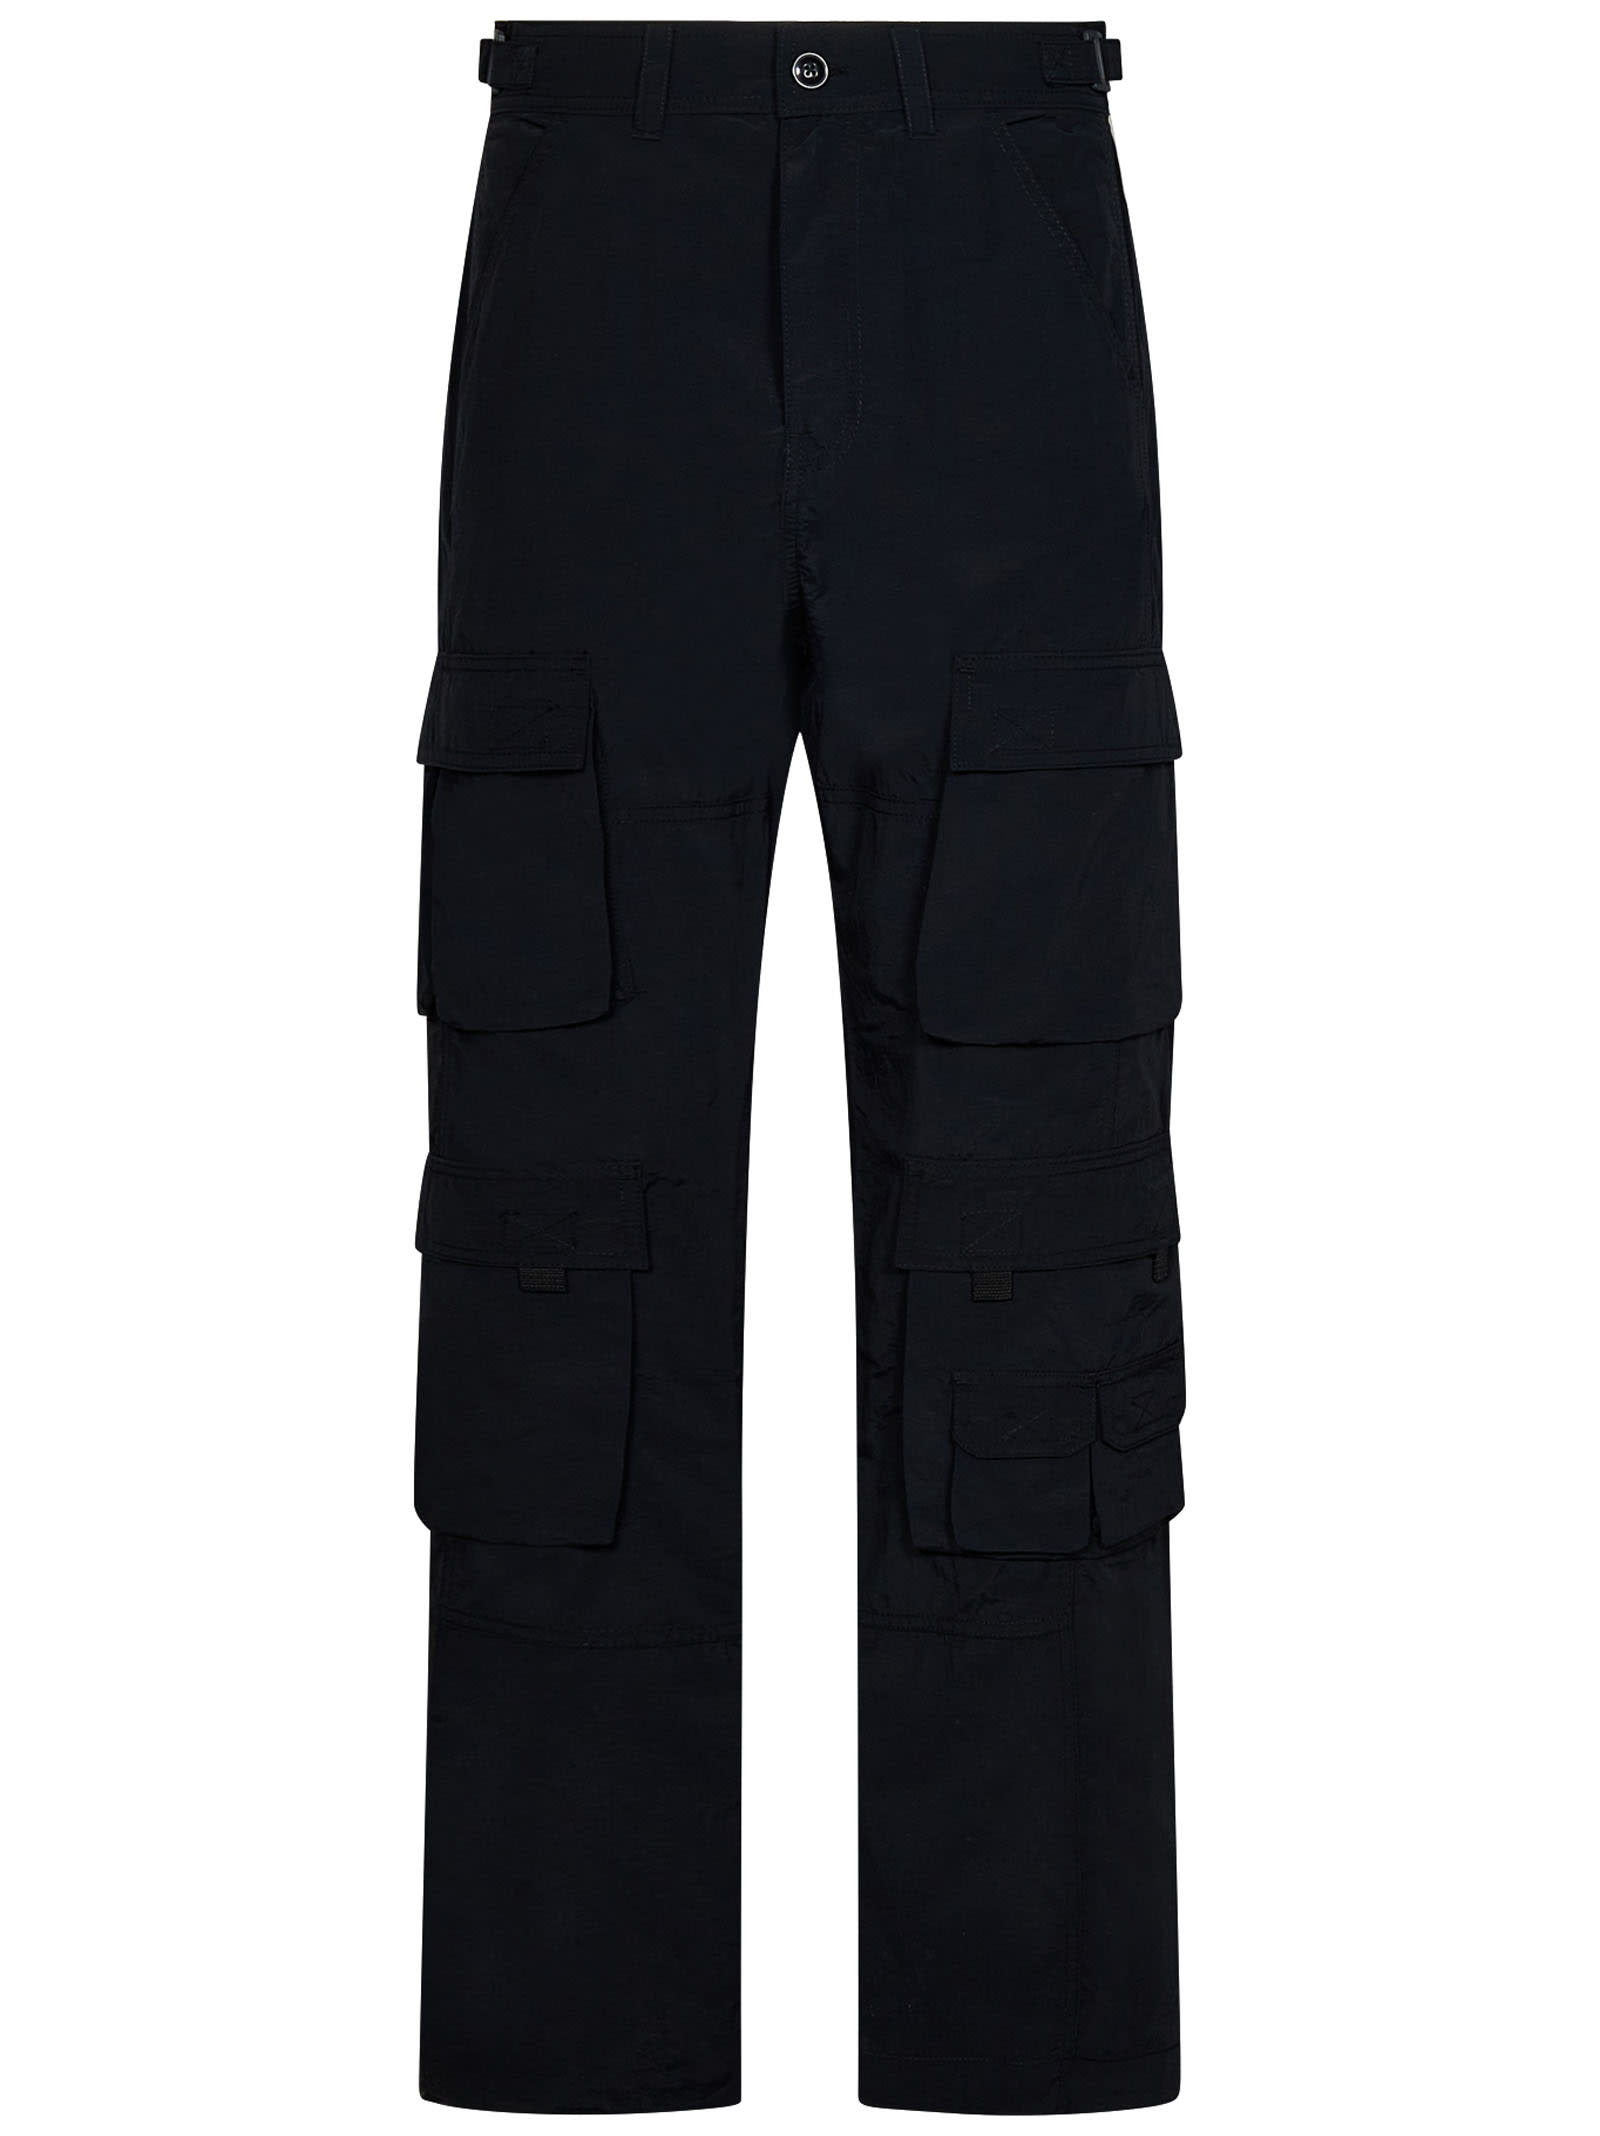 MARTINE ROSE TROUSERS